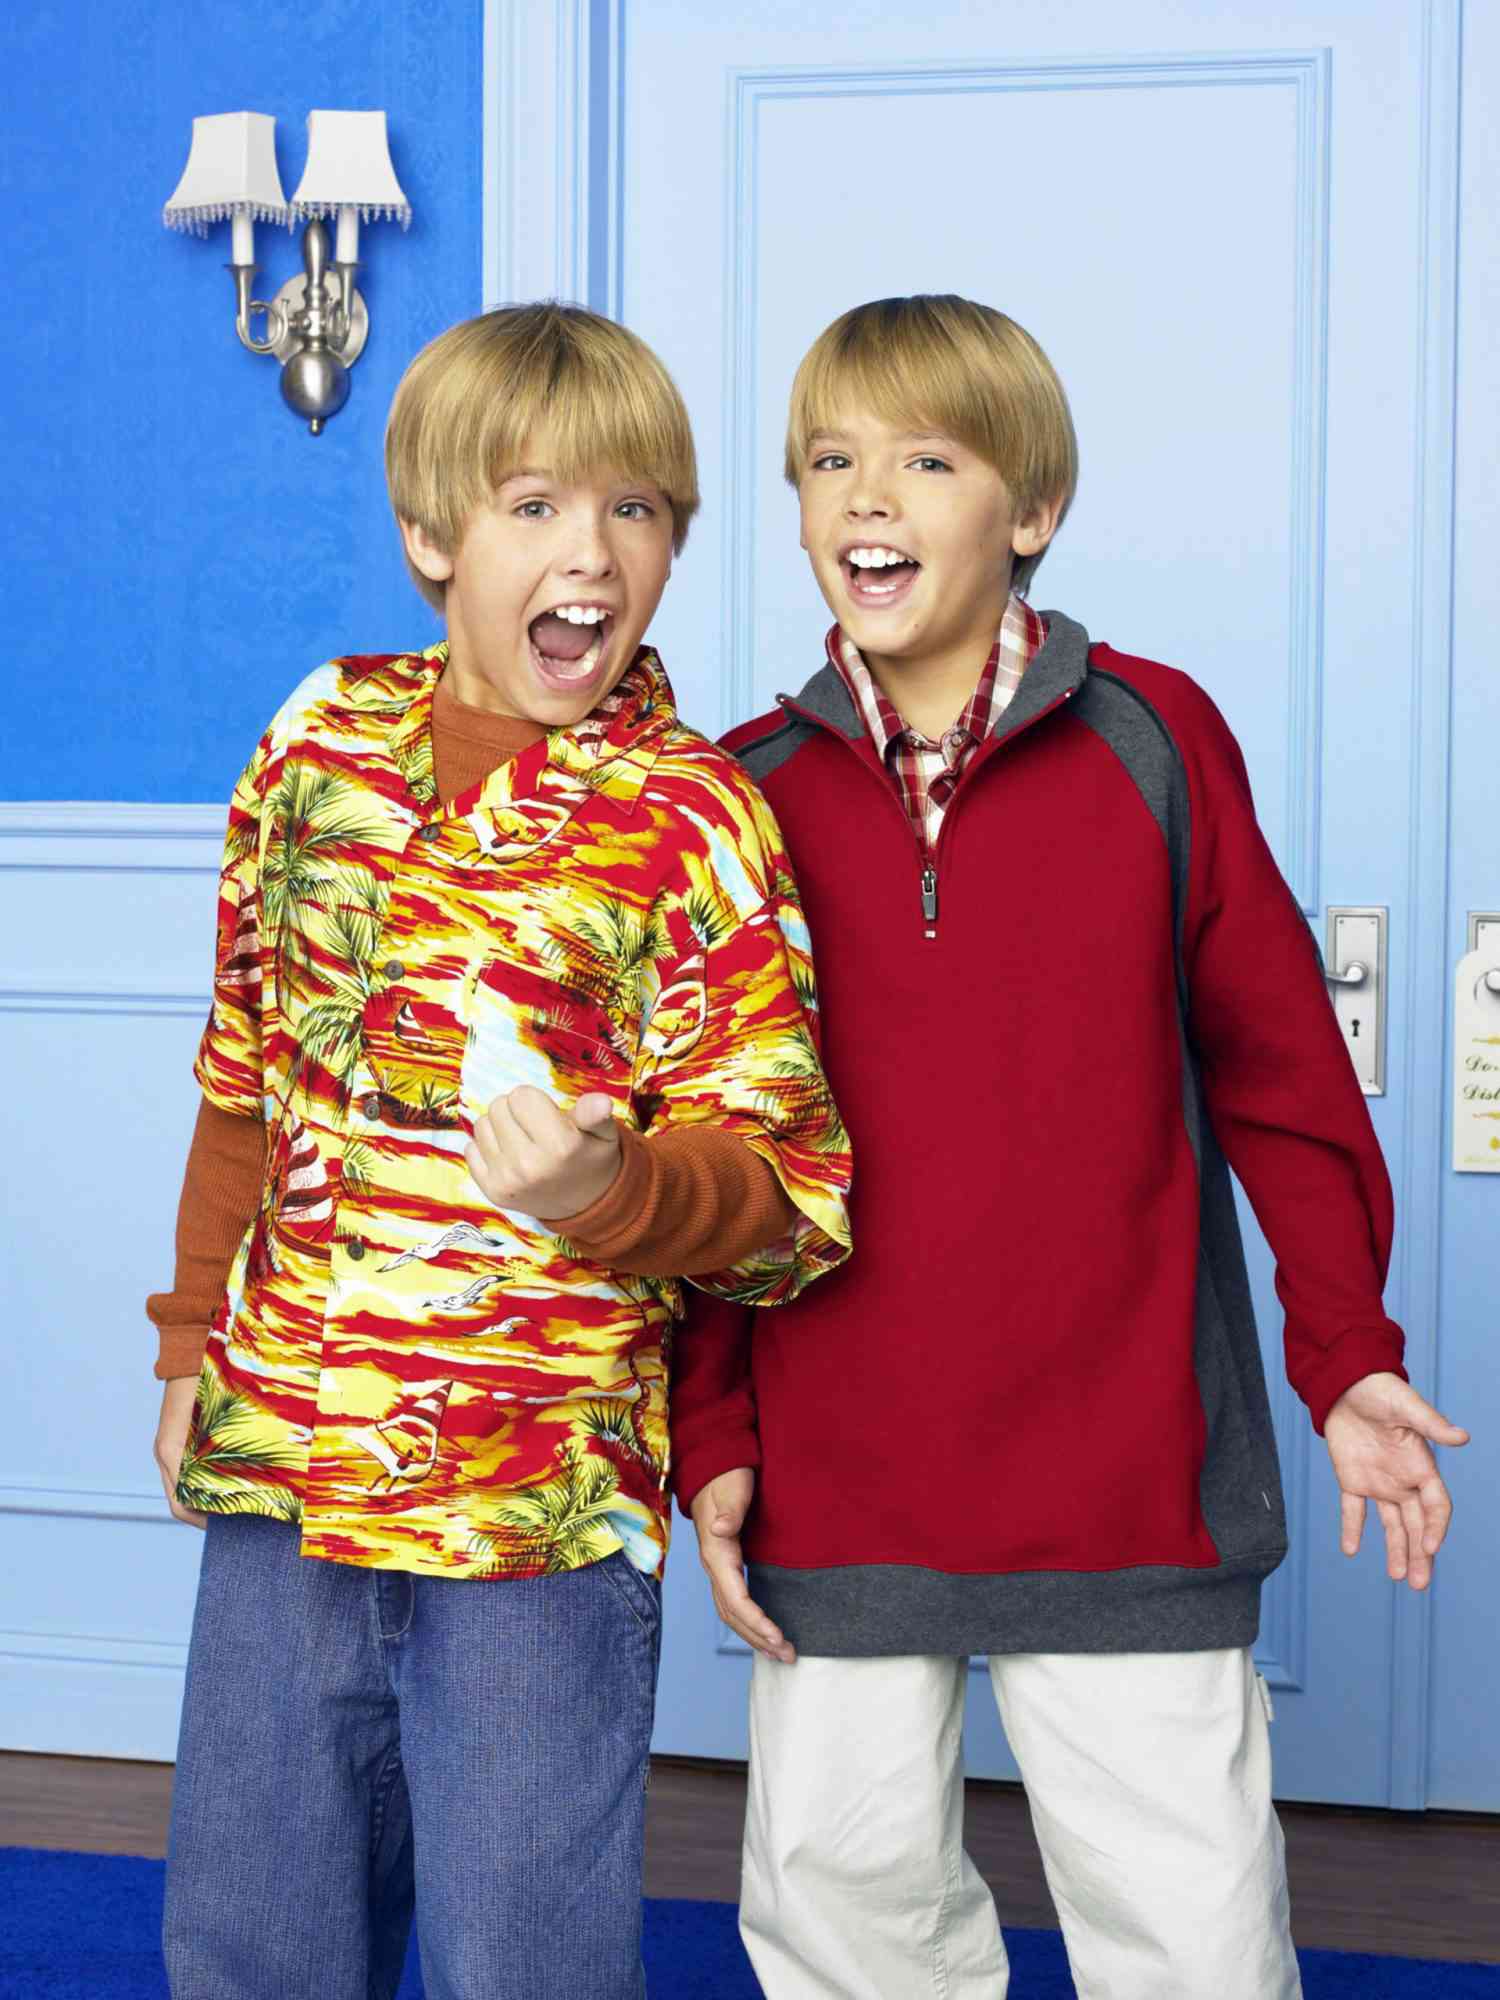 THE SUITE LIFE OF ZACK AND CODY, Dylan Sprouse, Cole Sprouse, (Season 1), 2005-08, © Disney Channel